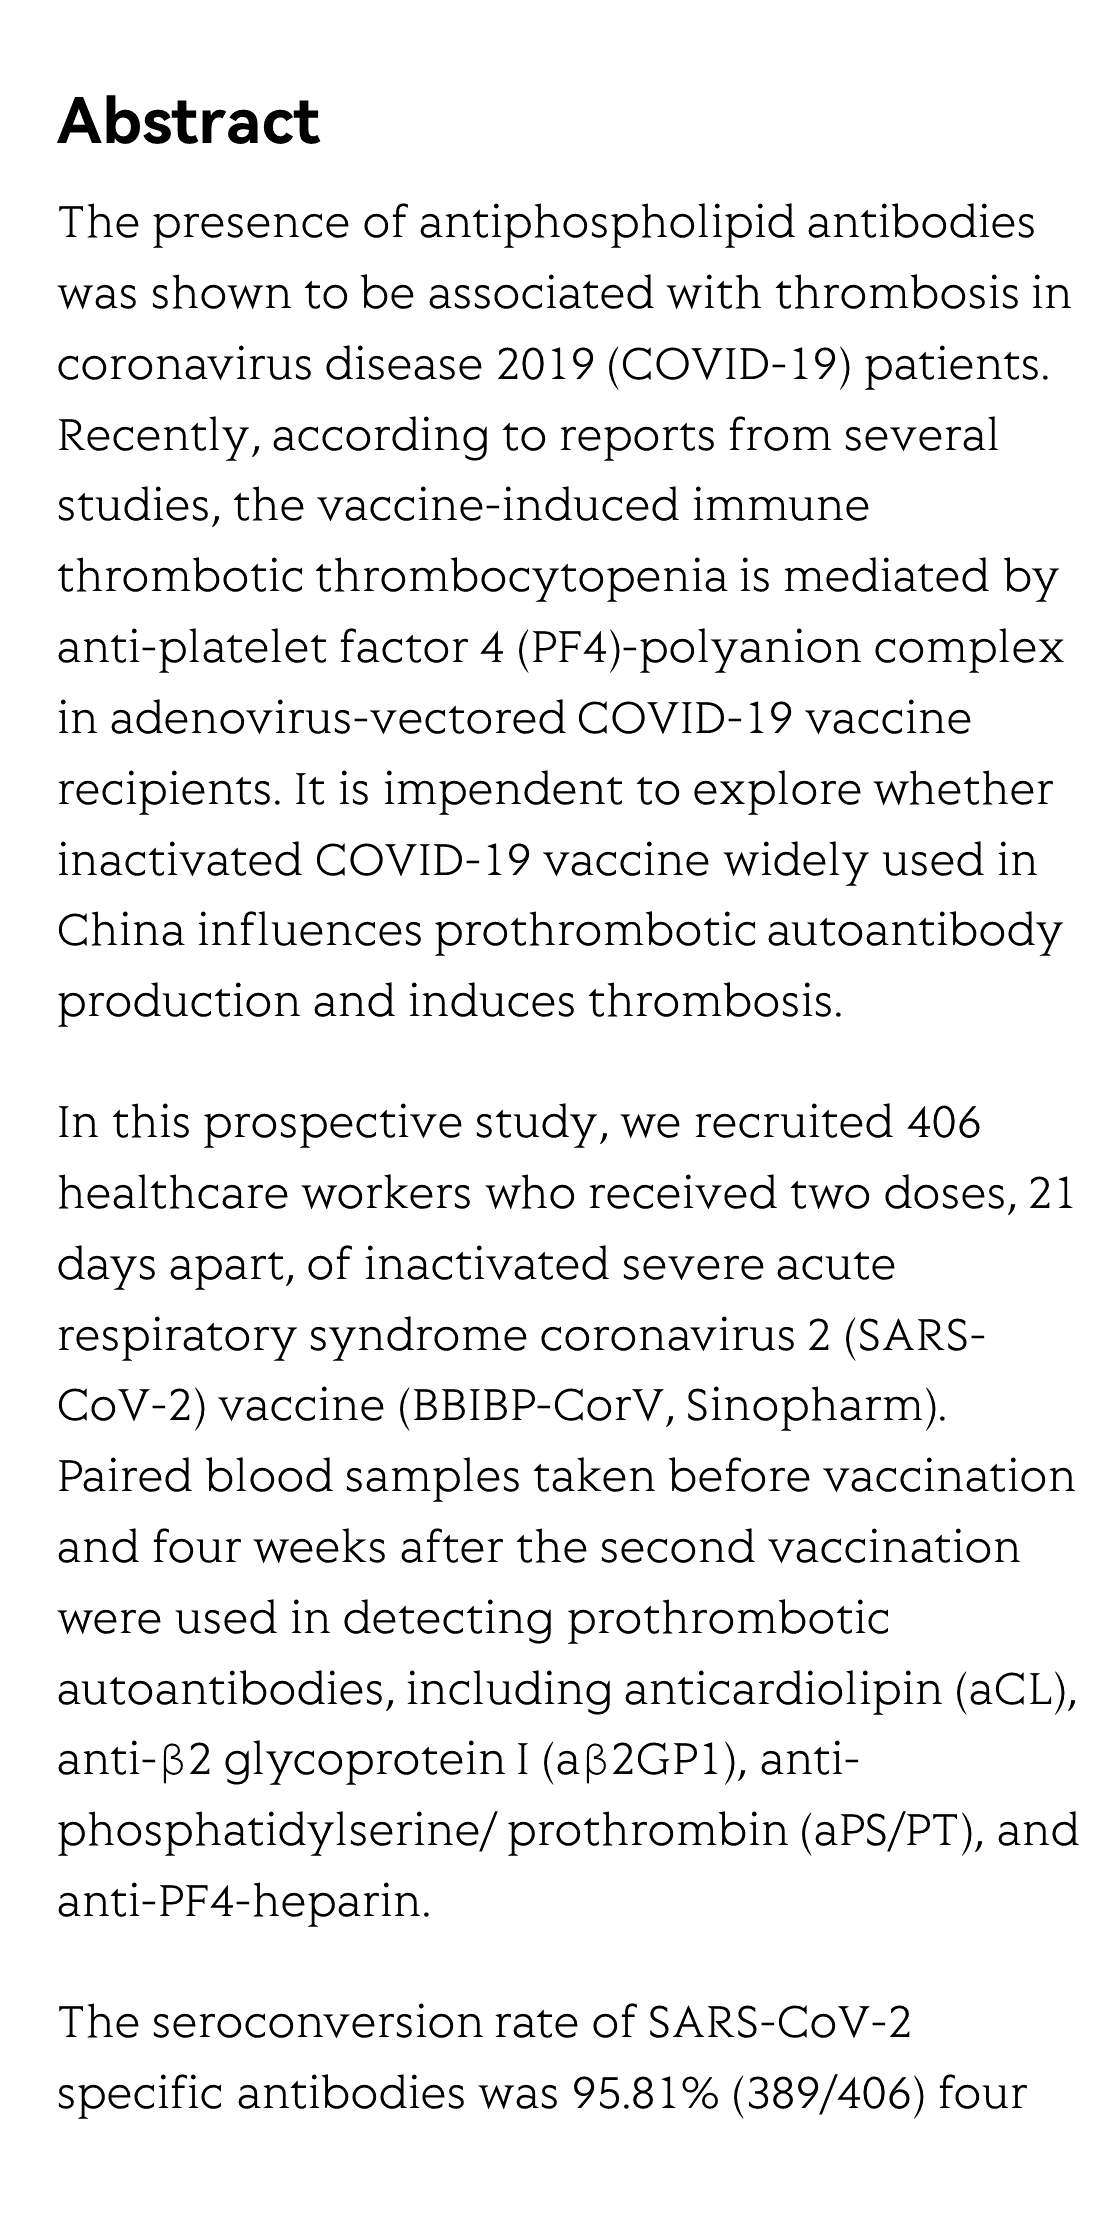 Inactivated SARS-CoV-2 vaccine does not influence the profile of prothrombotic antibody nor increase the risk of thrombosis in a prospective Chinese cohort_2